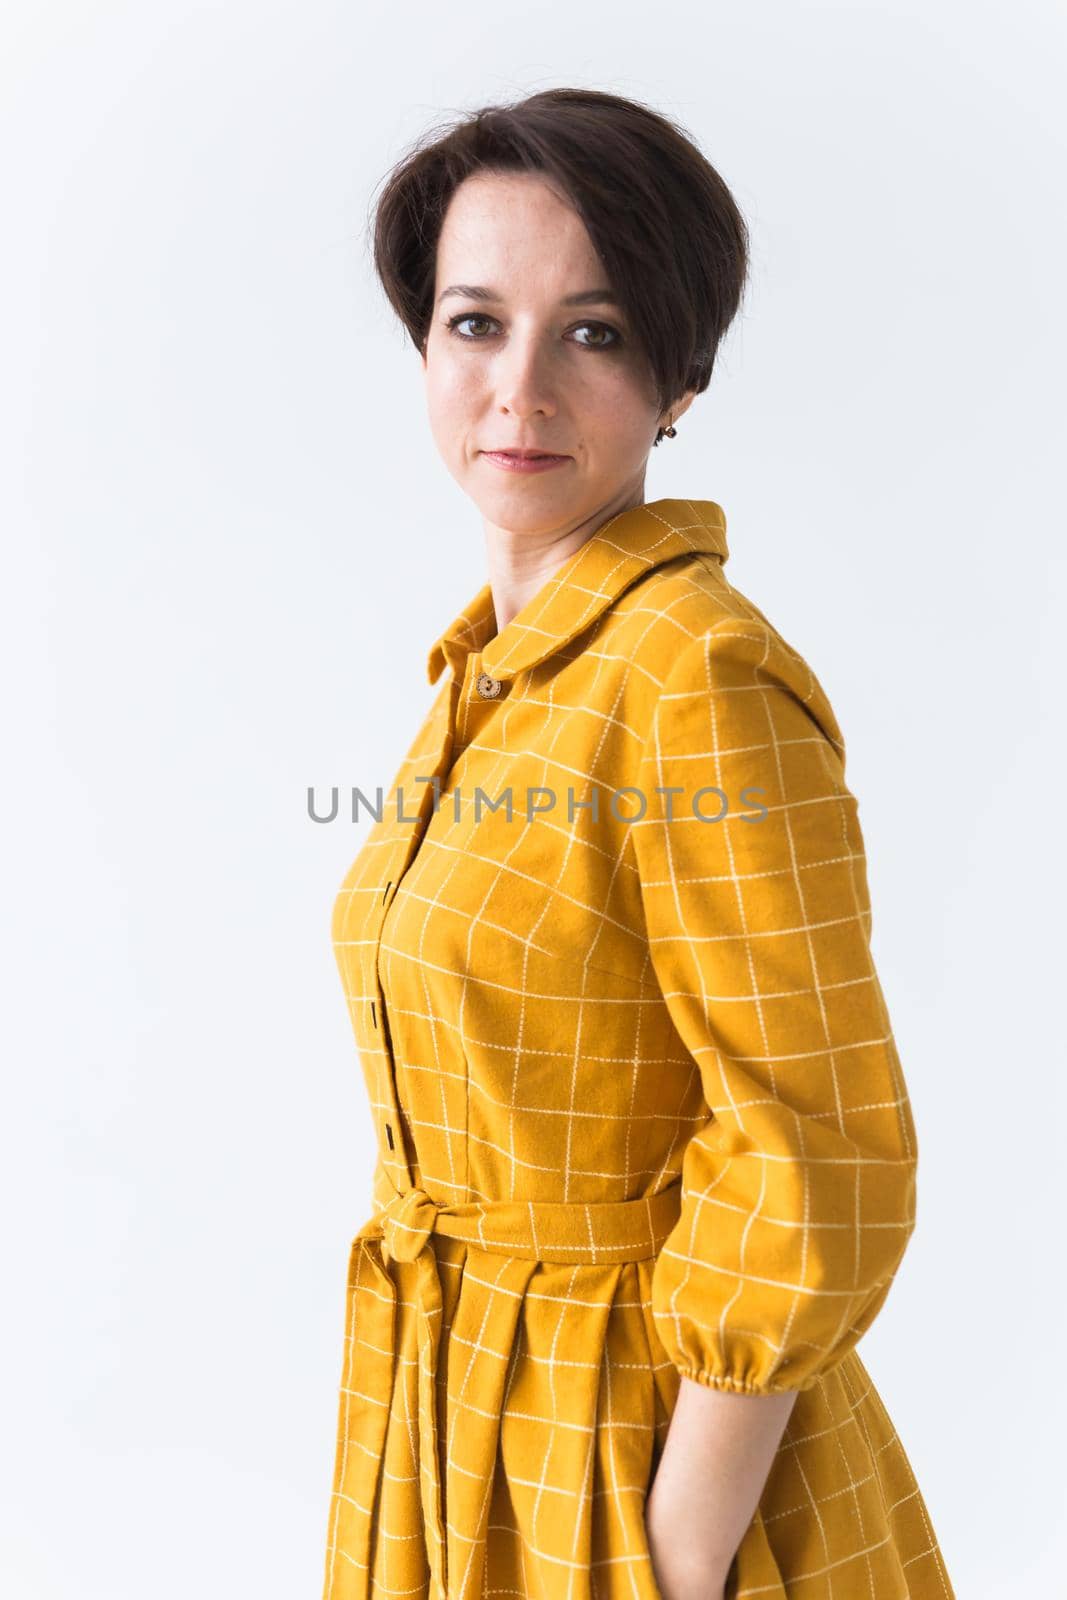 Portrait of a happy young woman in bright yellow dress over white room background. Beauty, fashion concept